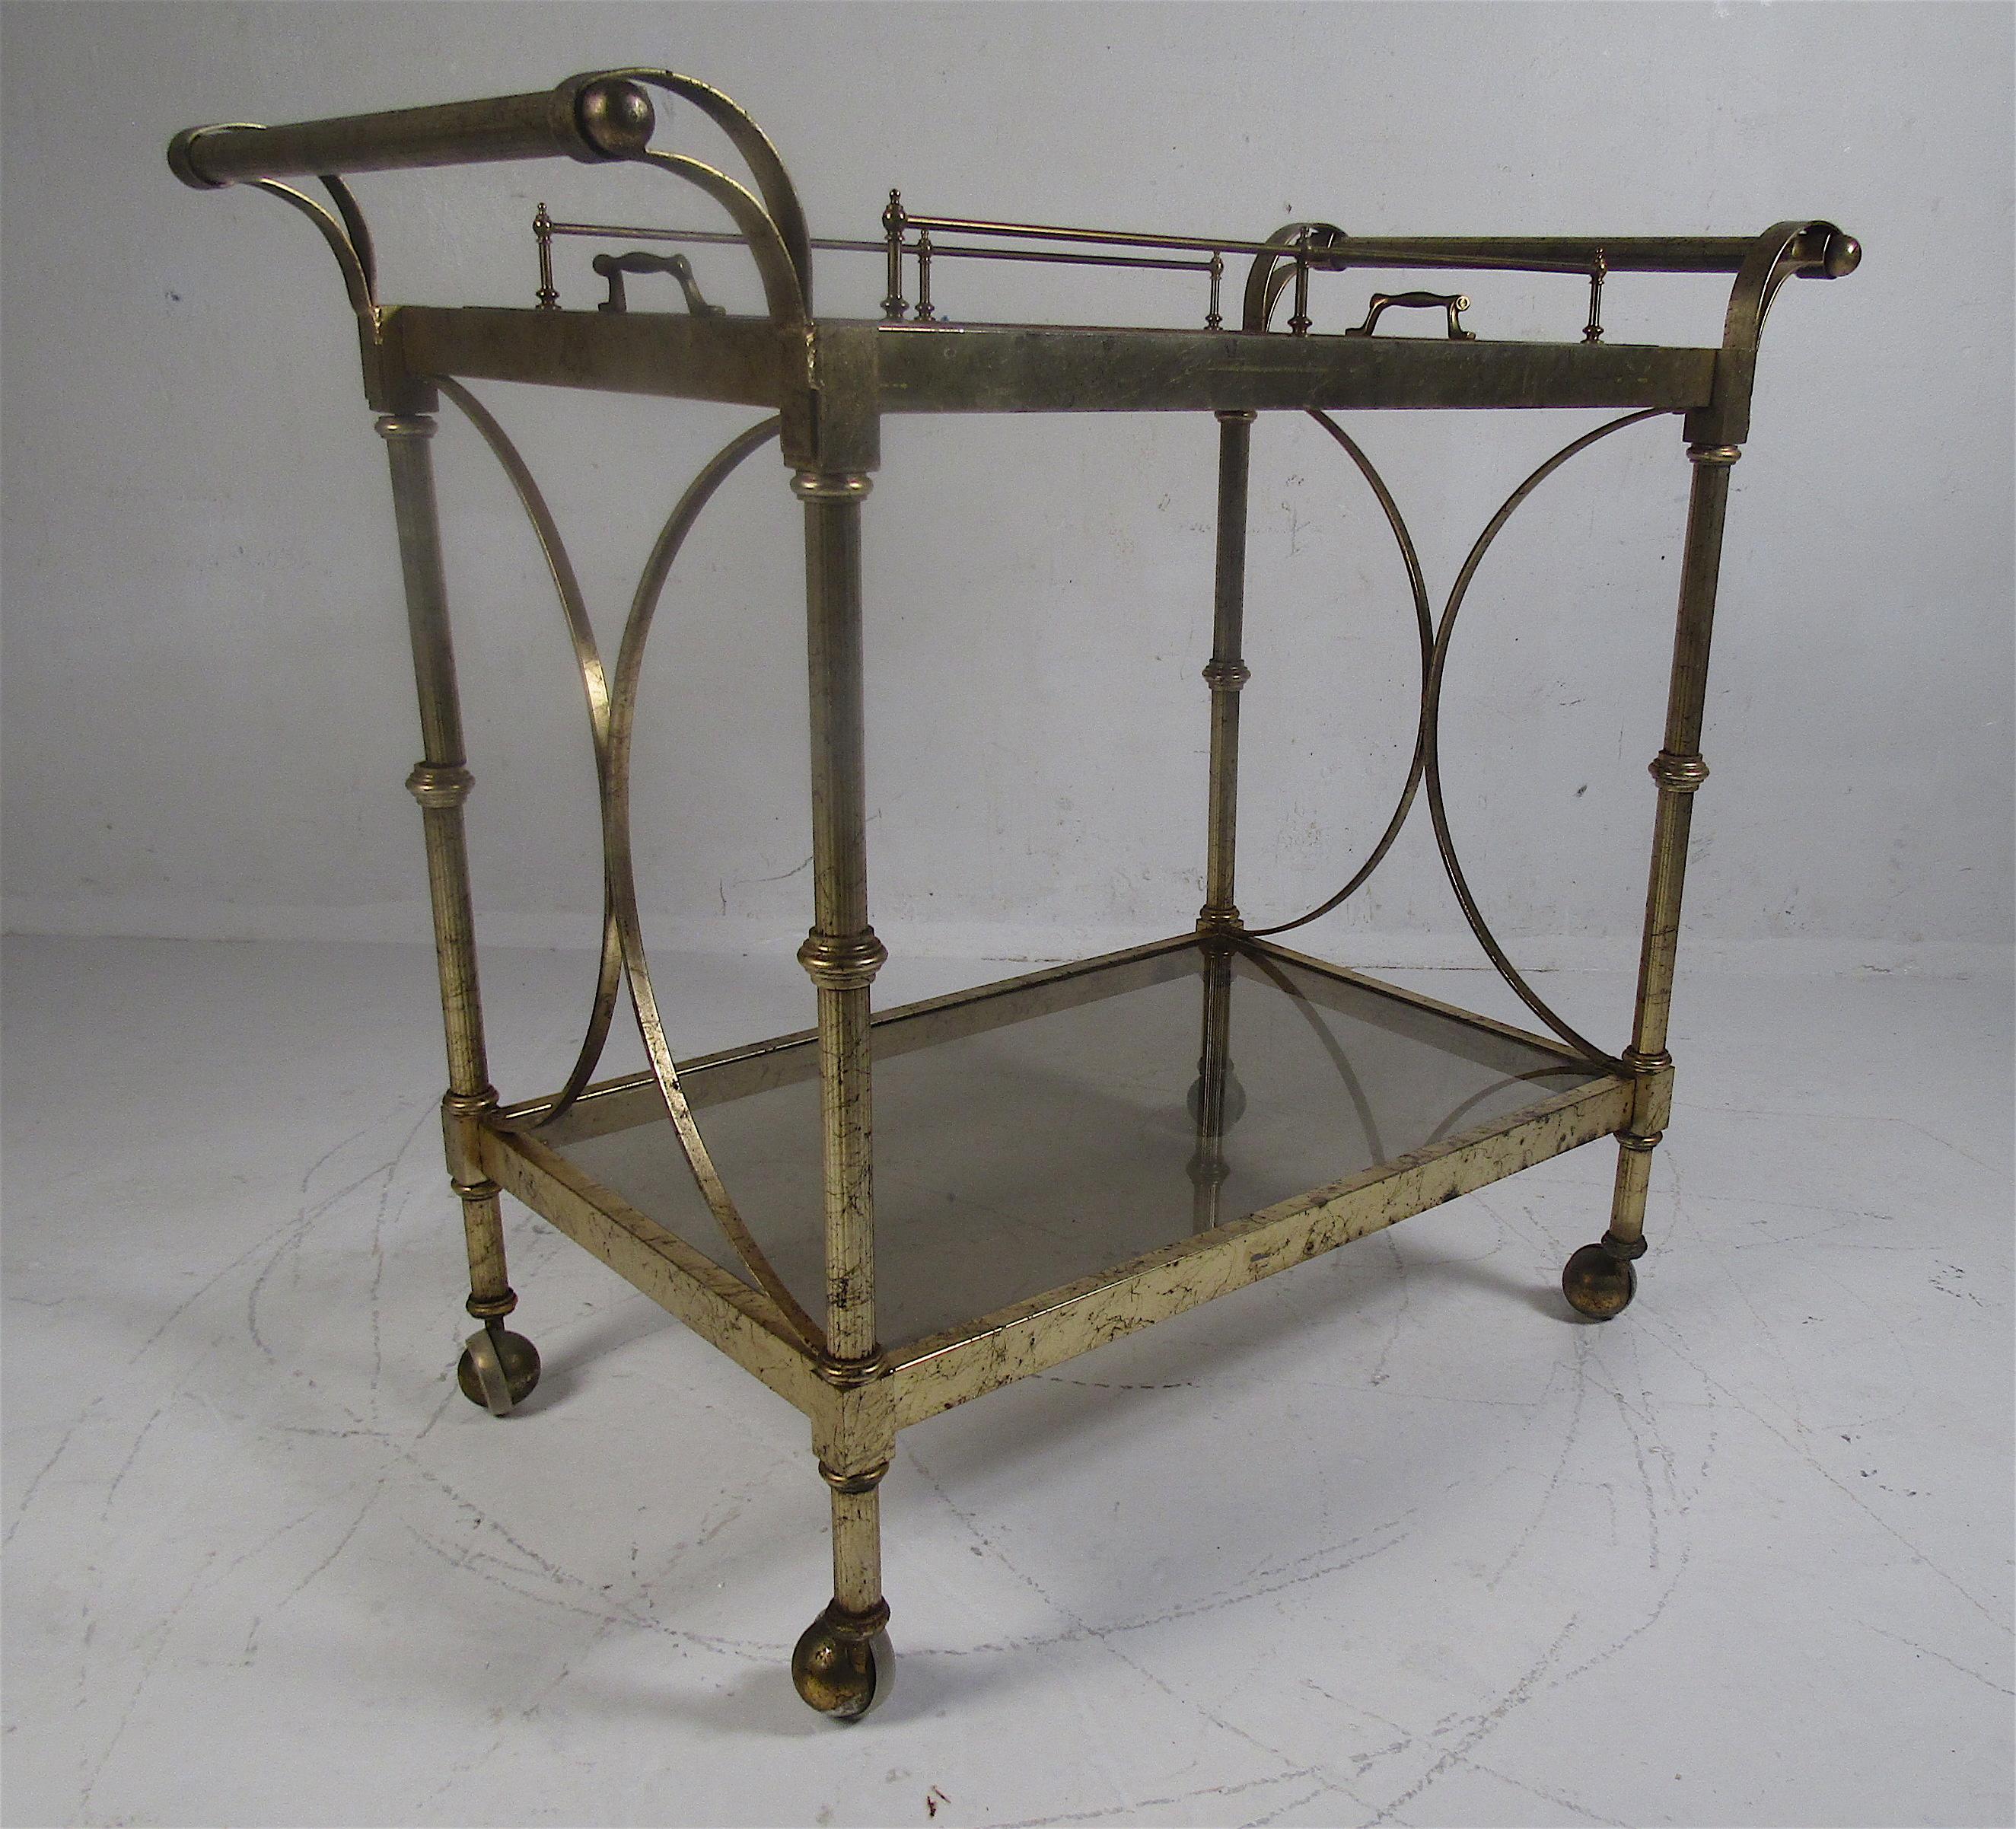 This beautiful vintage modern serving cart features a removable burl and glass tray on the top with brass handles. A wonderful design that is capable of serving guests or functioning as a side table. This Hollywood Regency style cart makes the